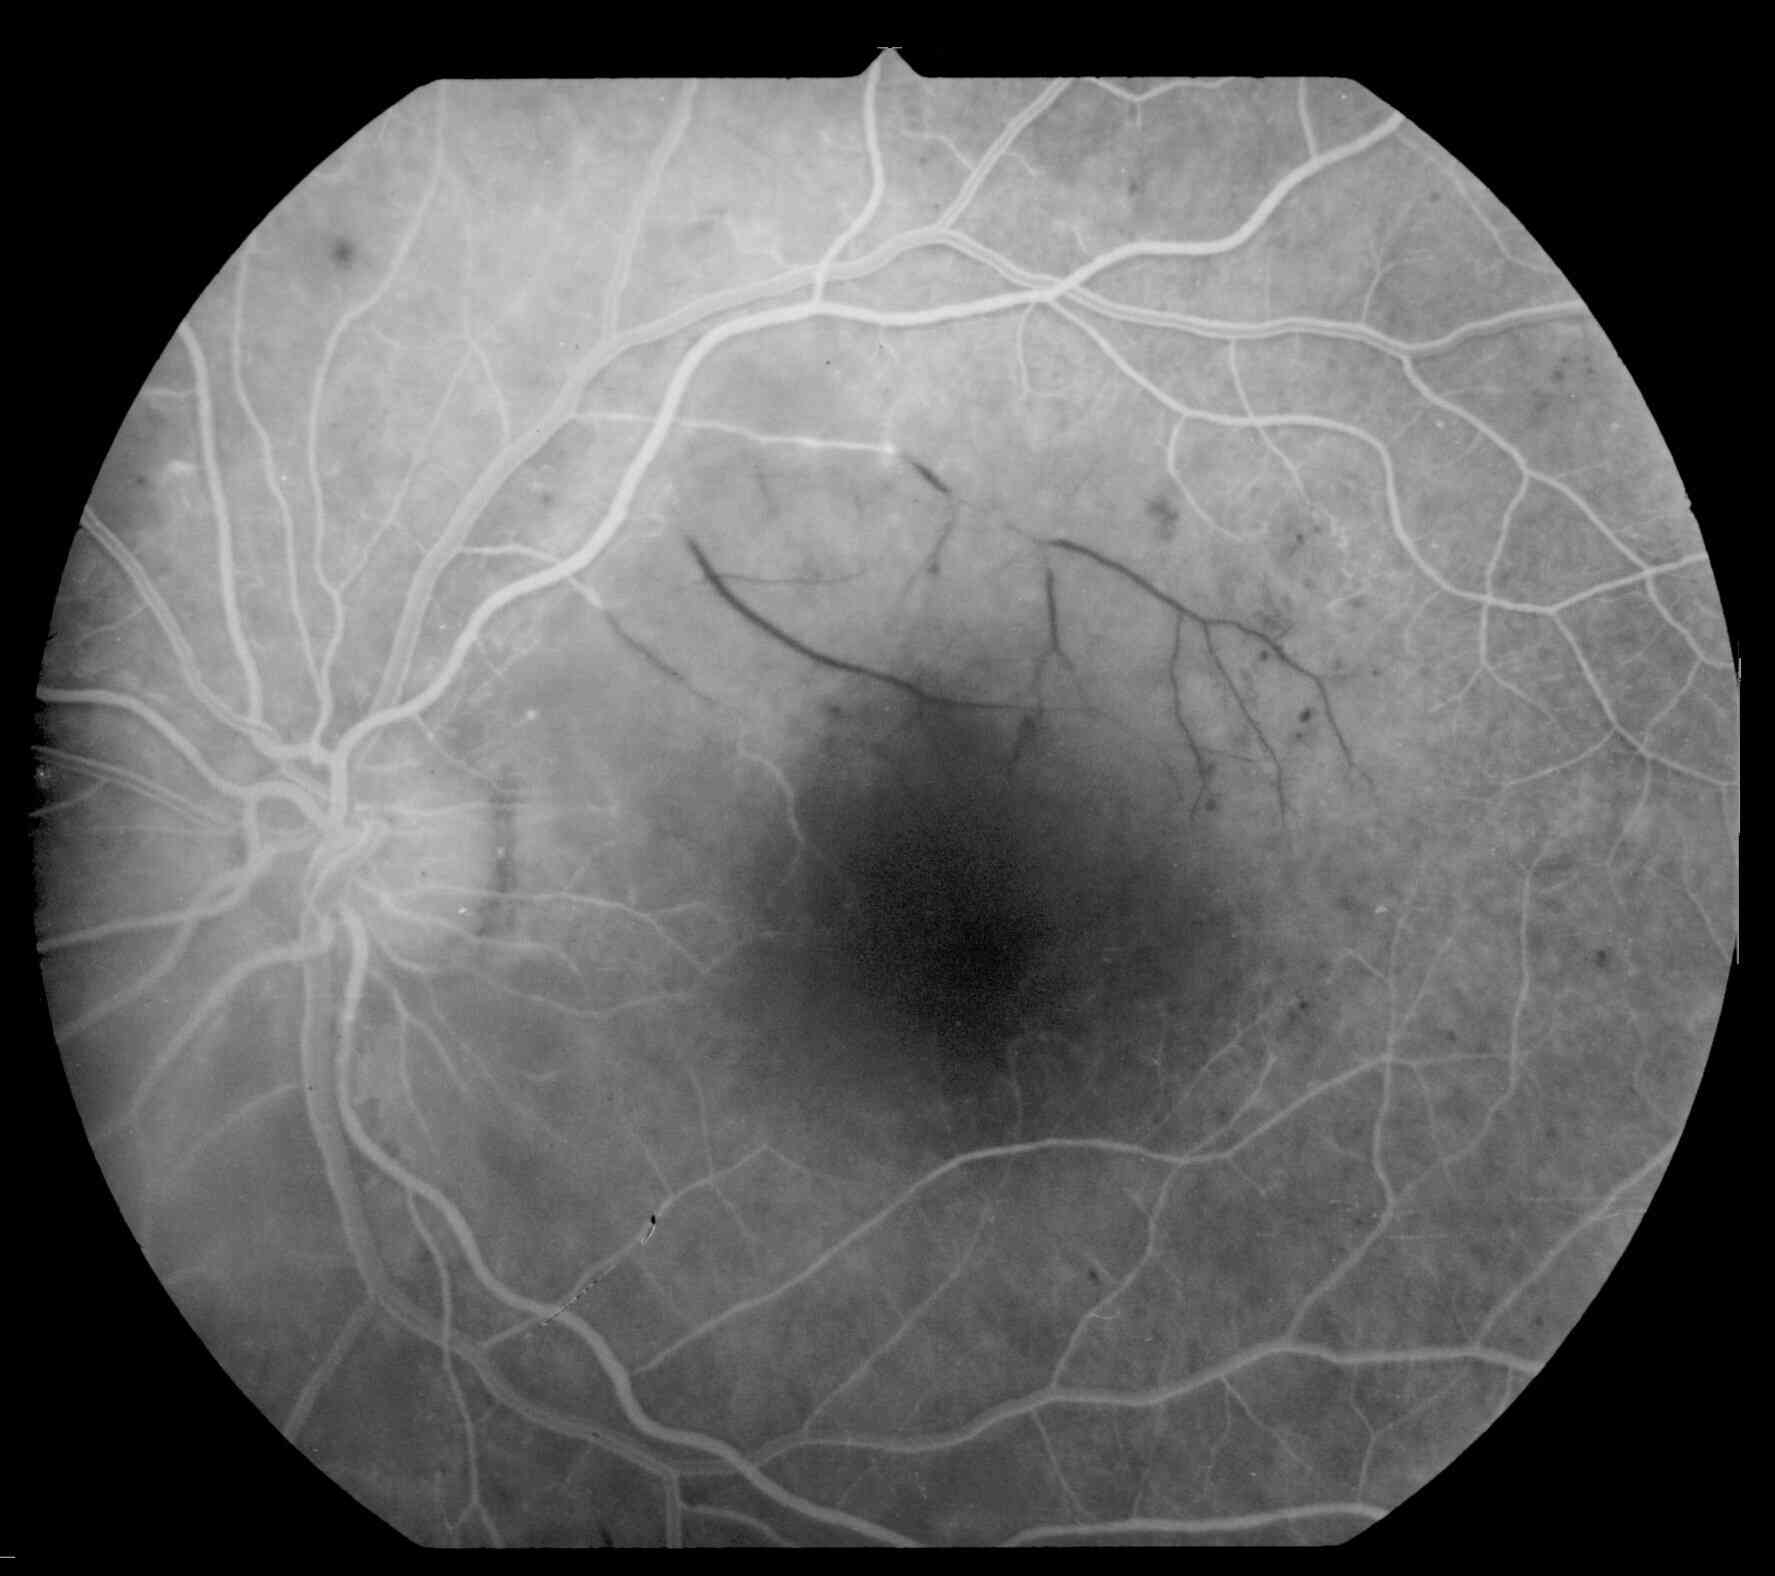 Emptied retinal venules due to arterial branch occlusion in diabetic retinopathy (fluorescein angiography). 10 June 1998. In Wikipedia. Retrieved from https://en.wikipedia.org/wiki/Diabetic_retinopathy#/media/File:Retinal_branch_occlusion_ratkaj.jpg under CC BY-SA 4.0 license.